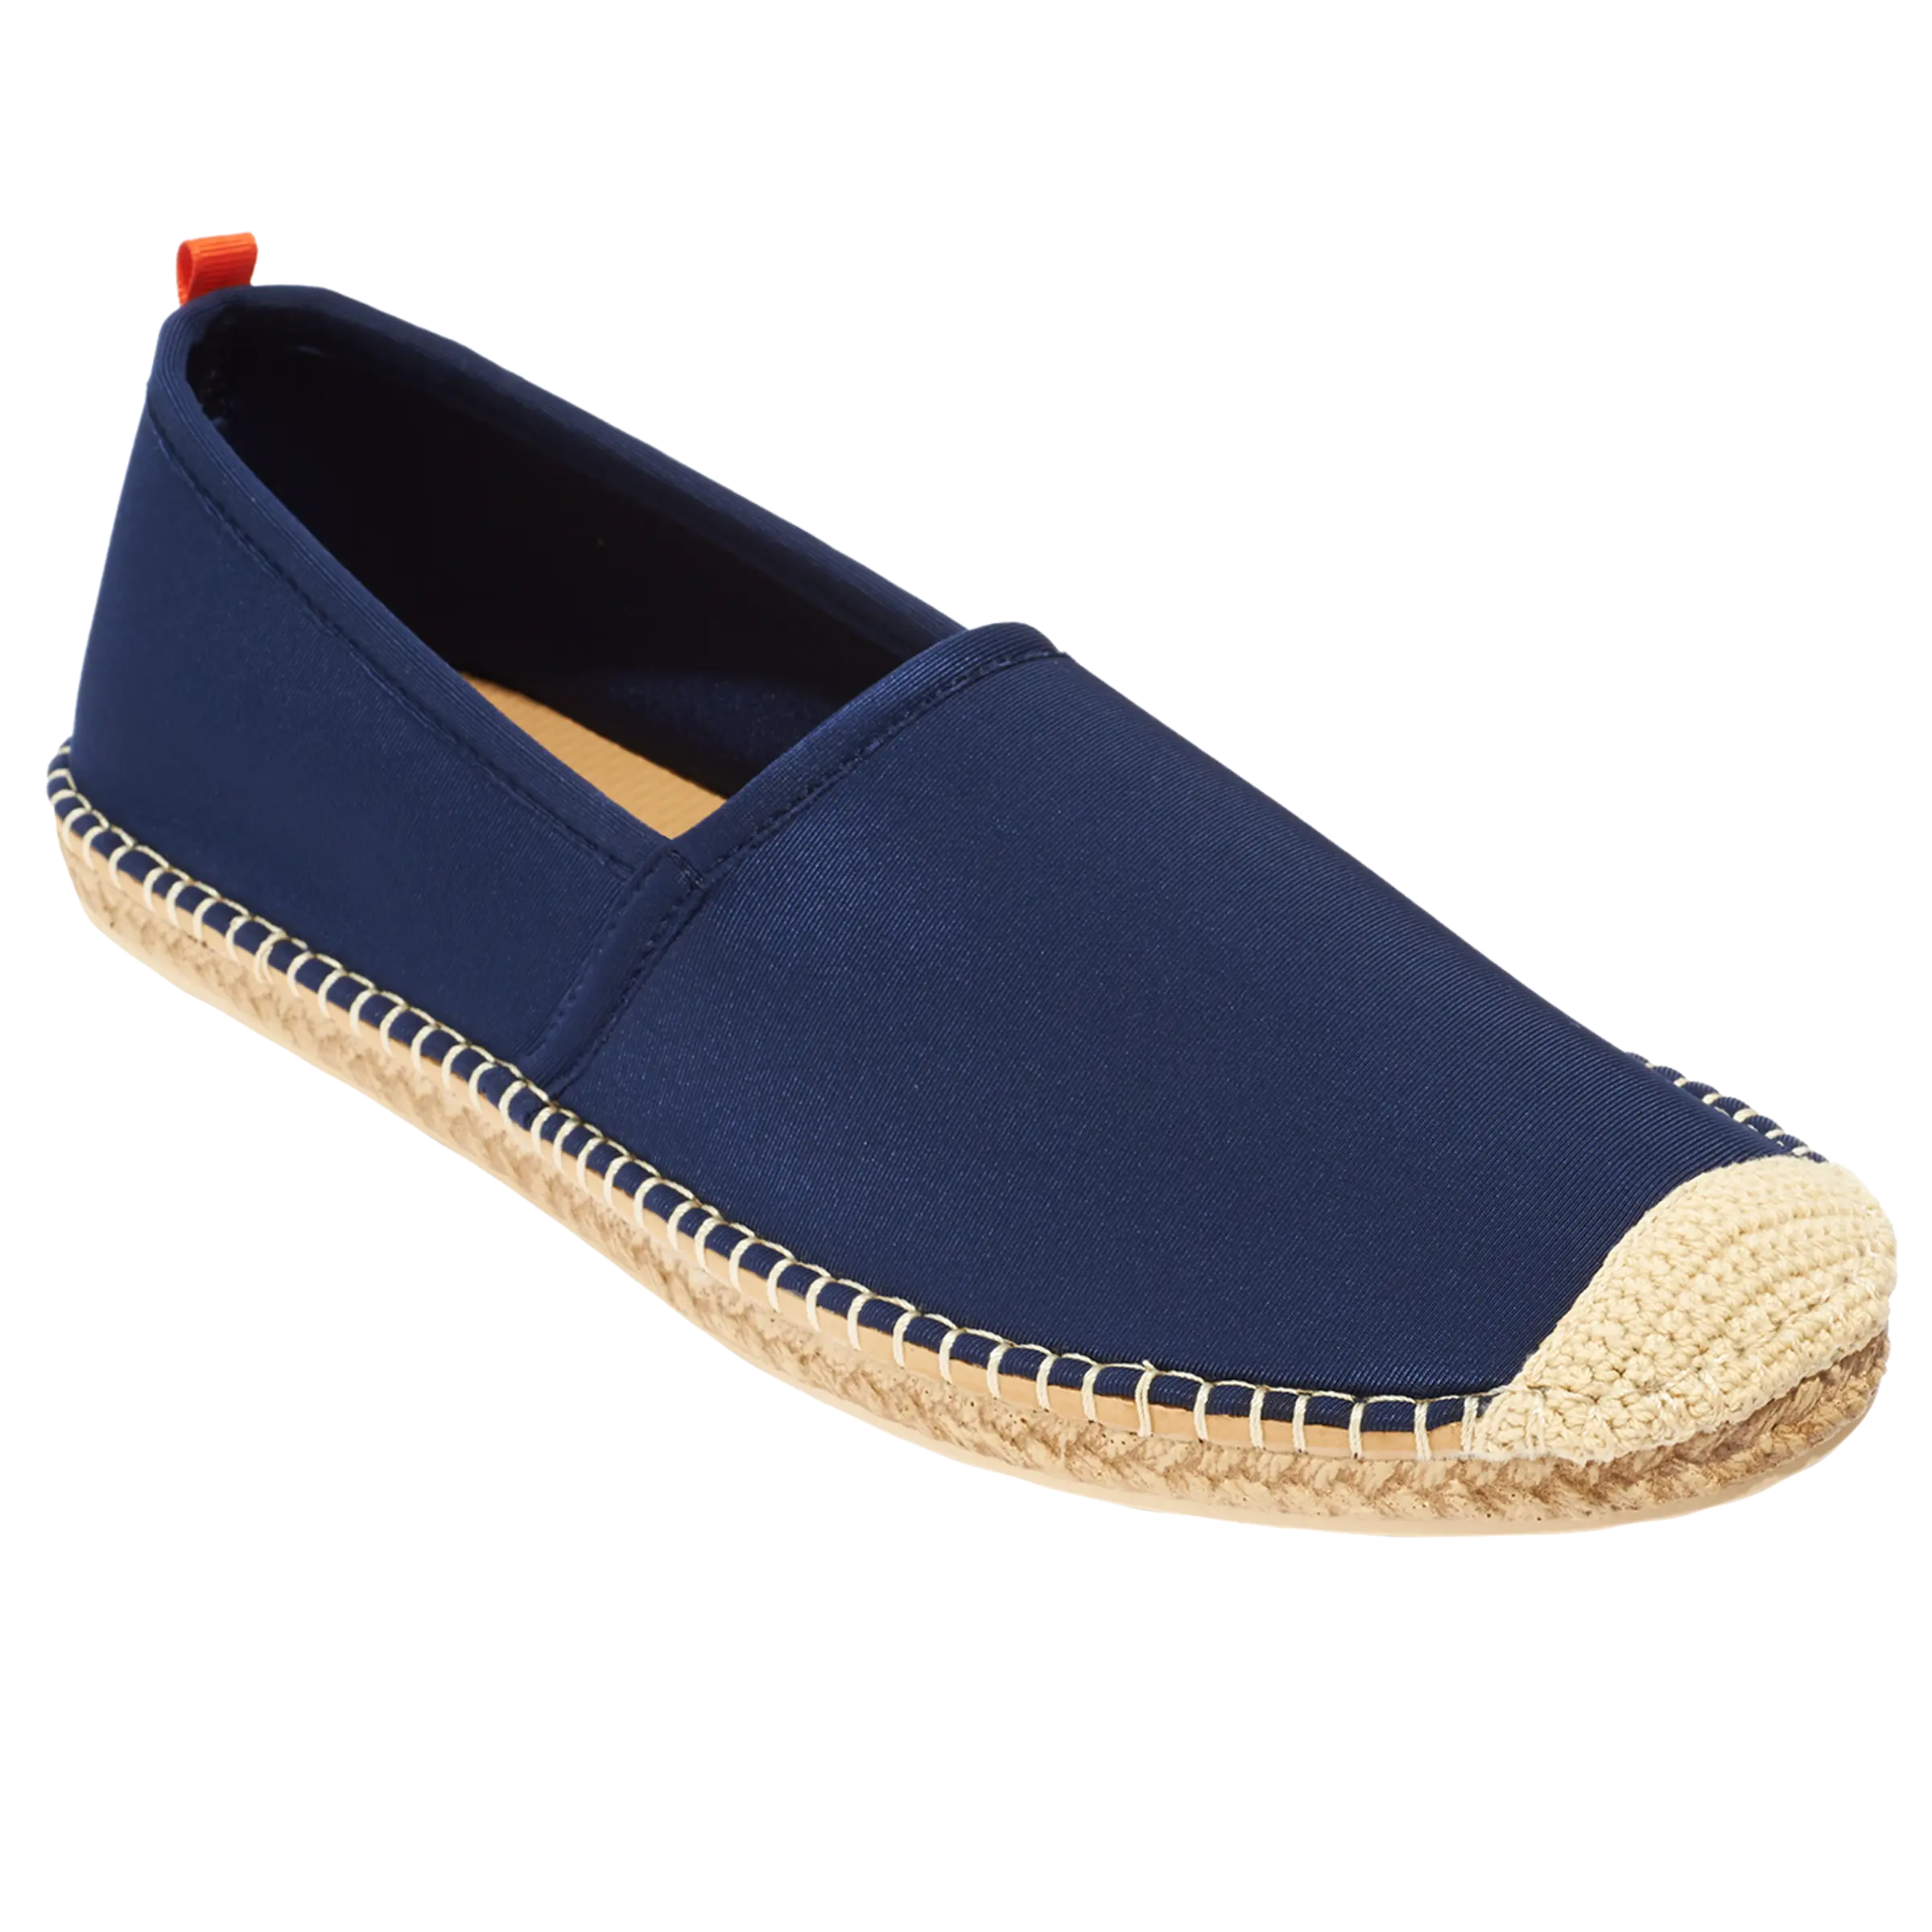 Review: Sea Star's Beachcomber Espadrilles Are Stylish and Waterproof –  Robb Report